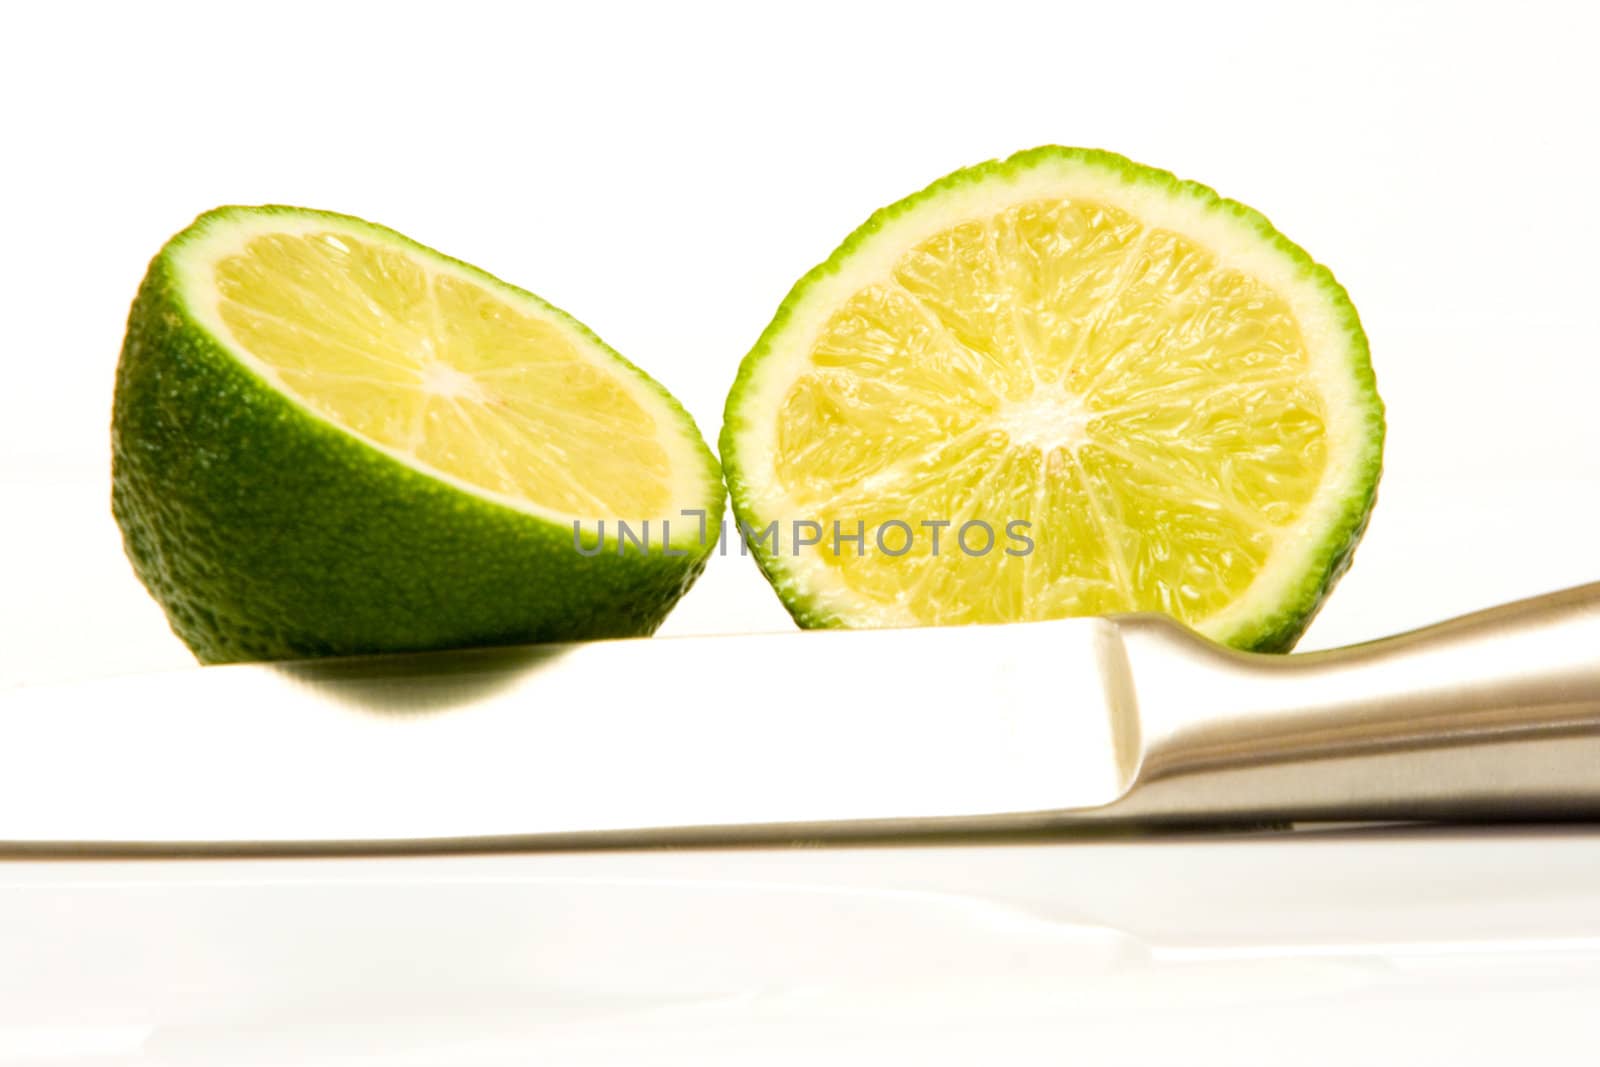 high key image of a sliced lime and a stainless steel knife on a white background